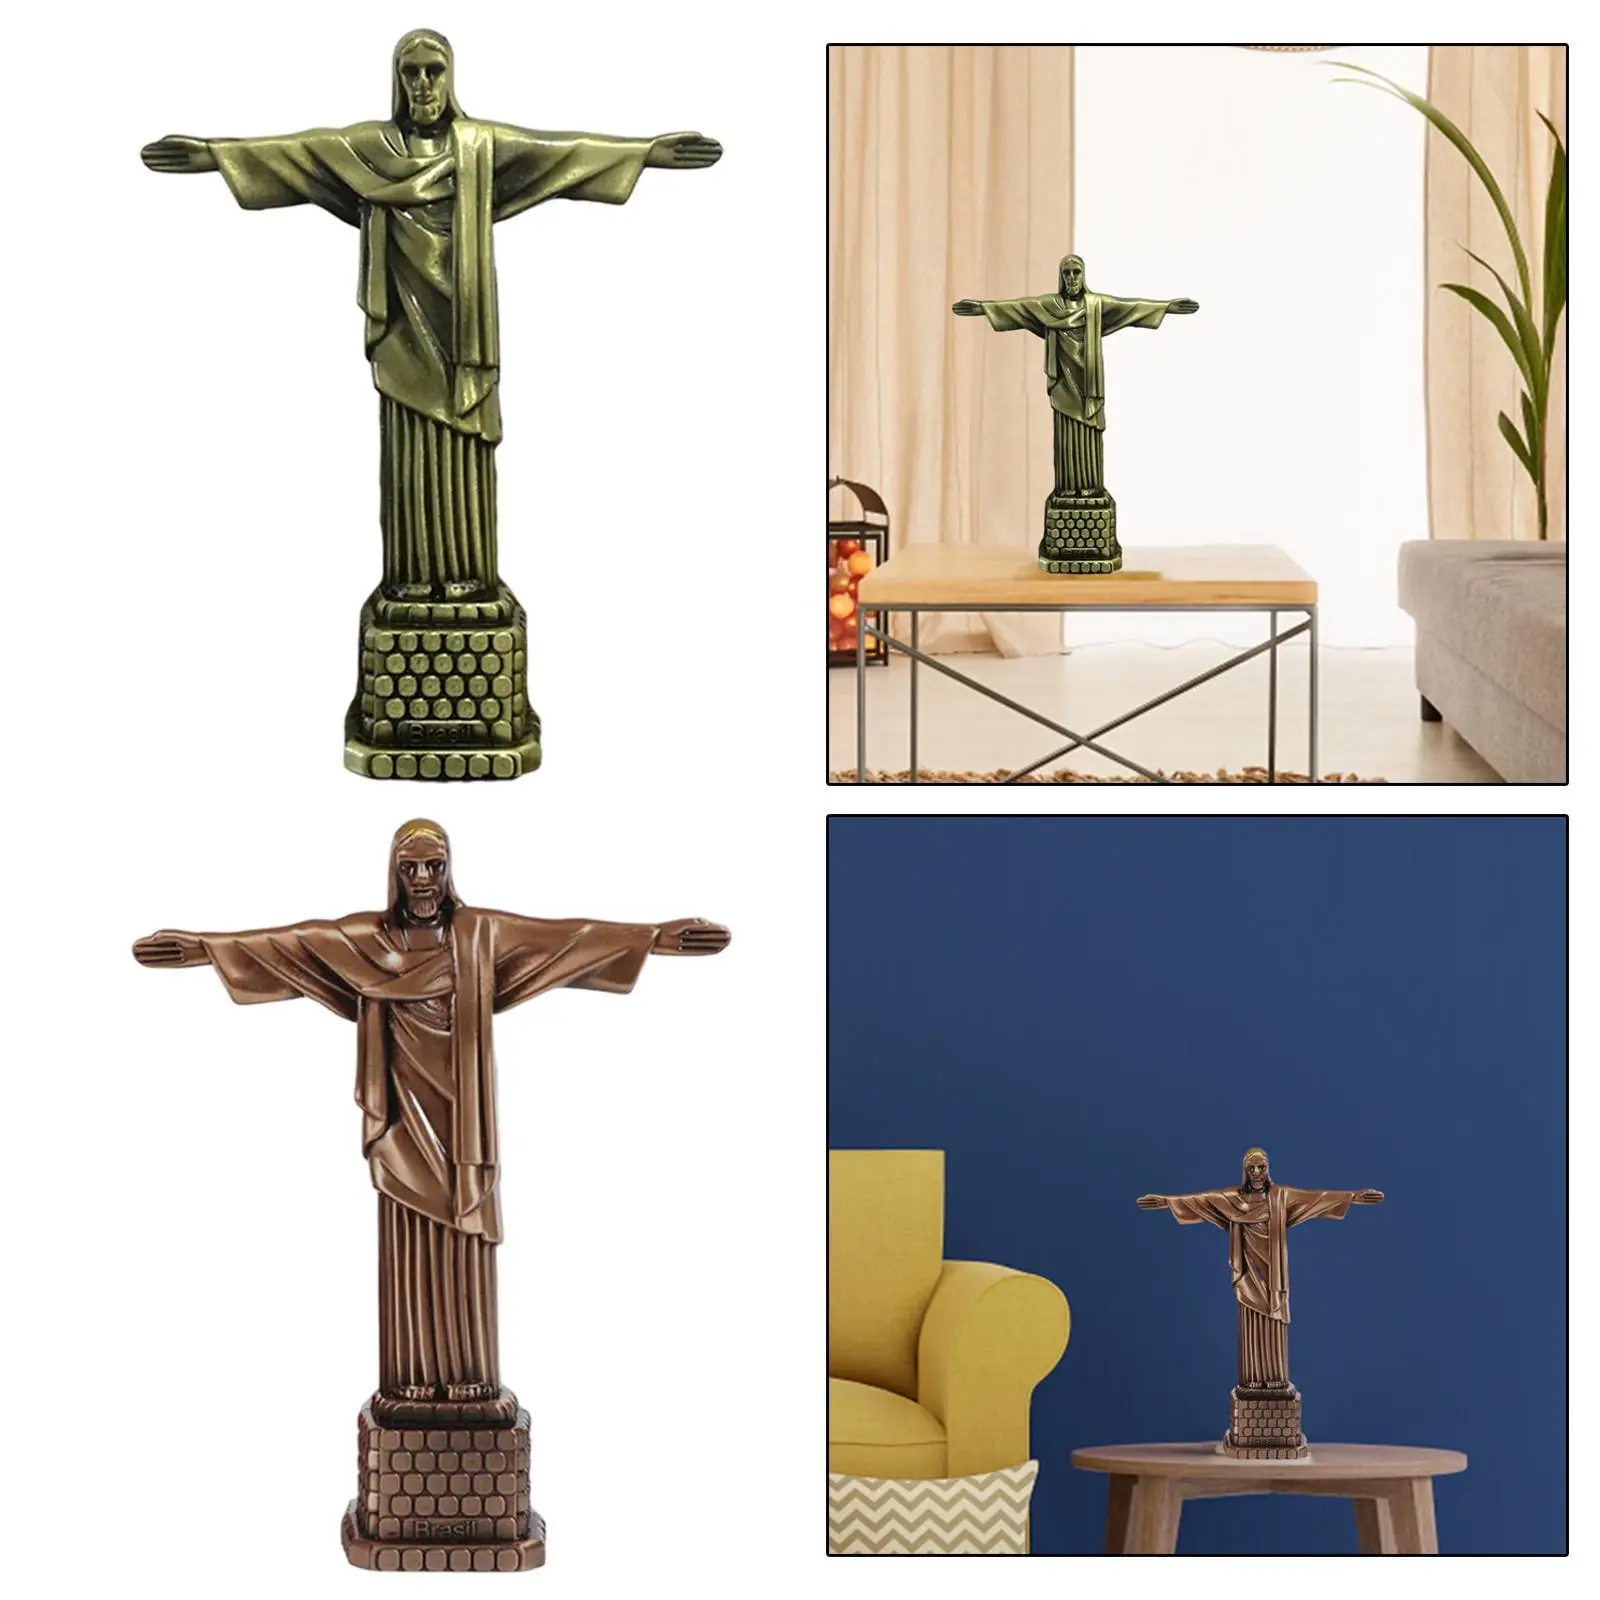 Religious  Holy  Figure ian Statue Model Collection Religious Sculpture Office Furnishing Decor